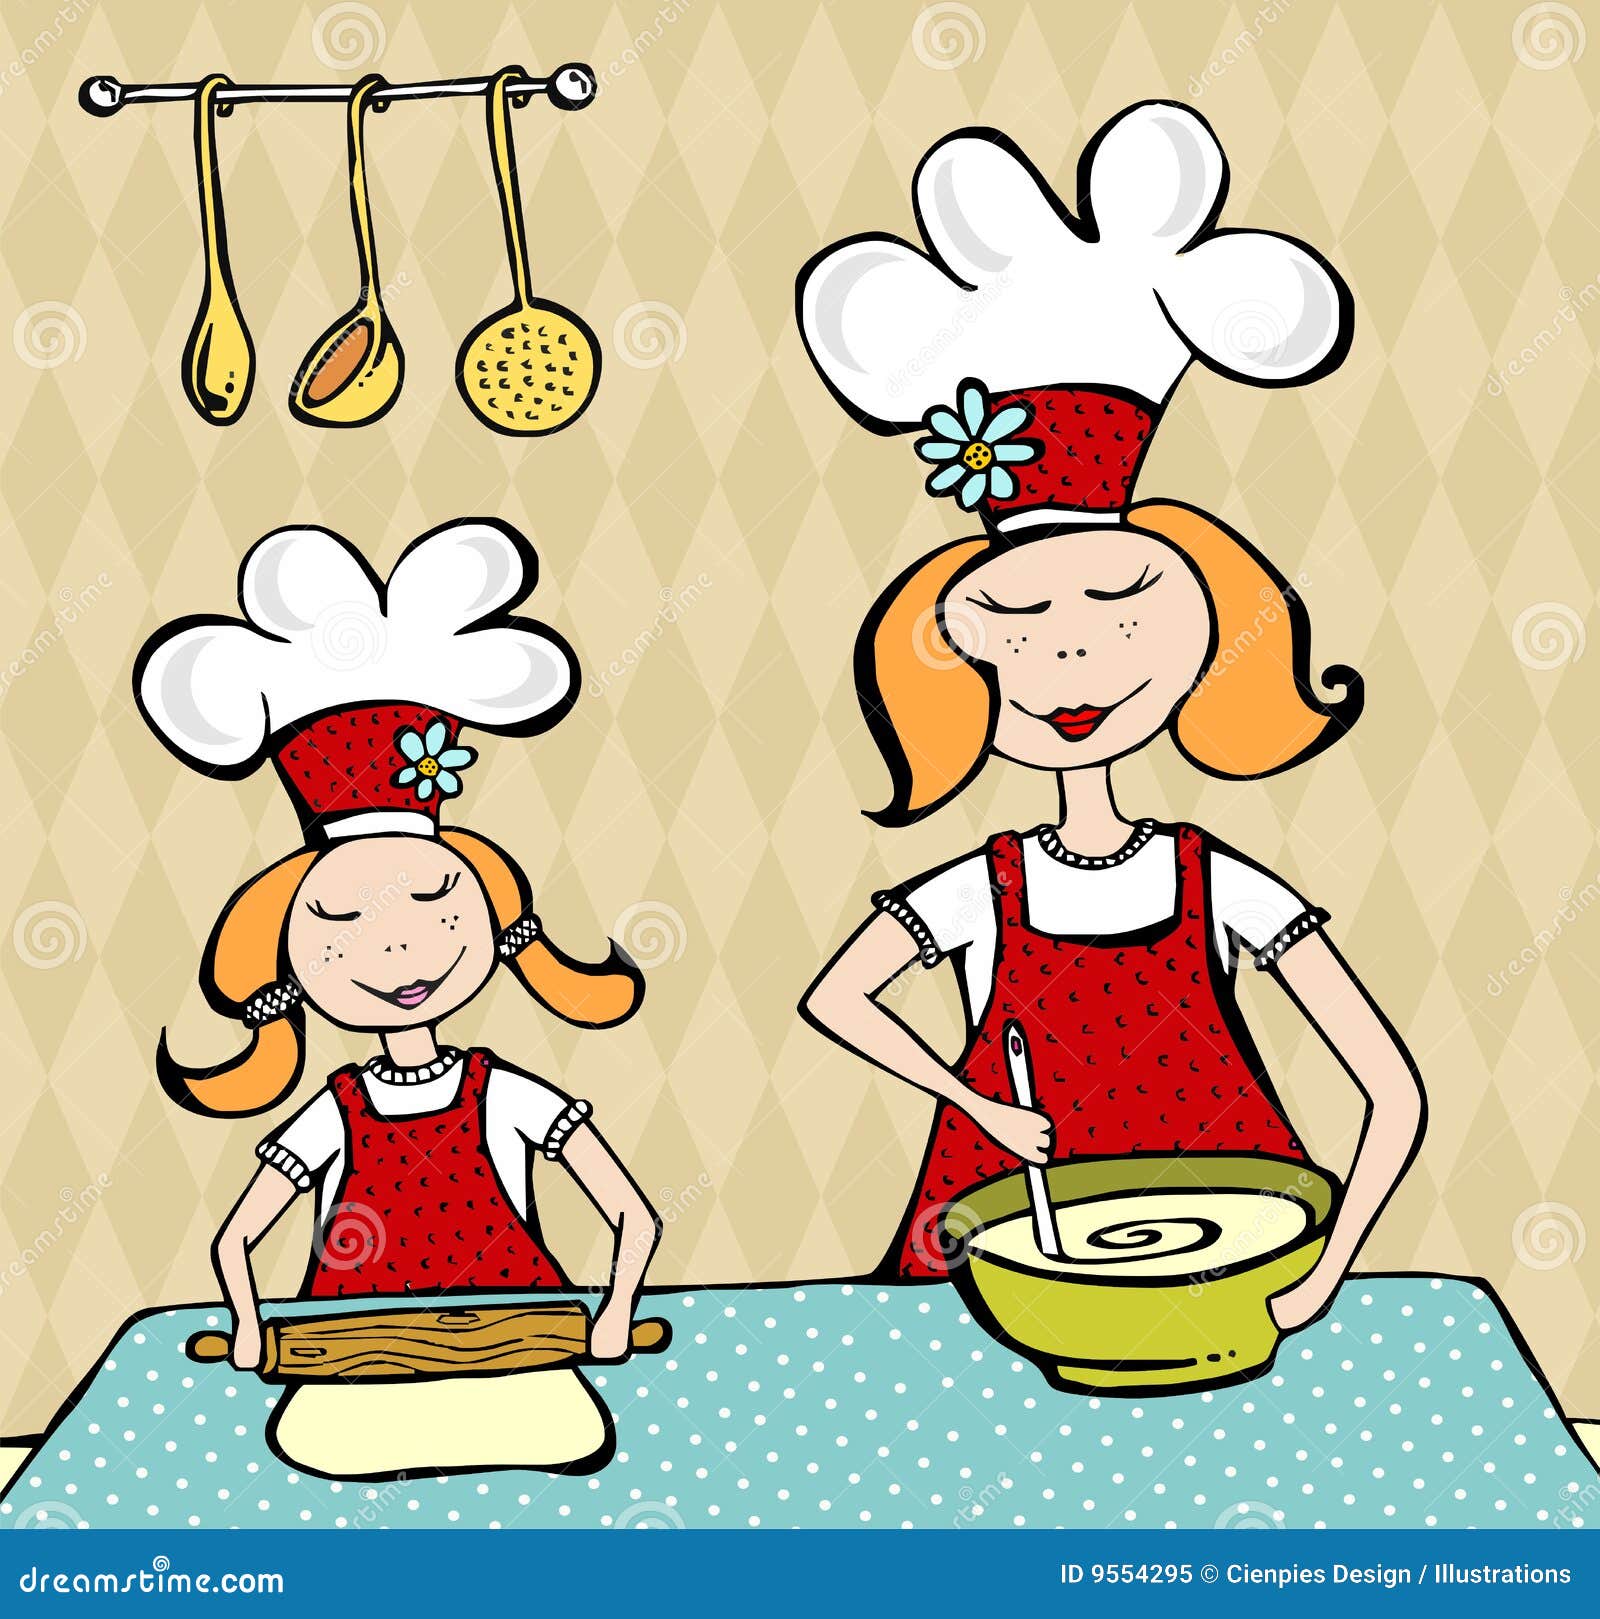 clipart of mother cooking - photo #48